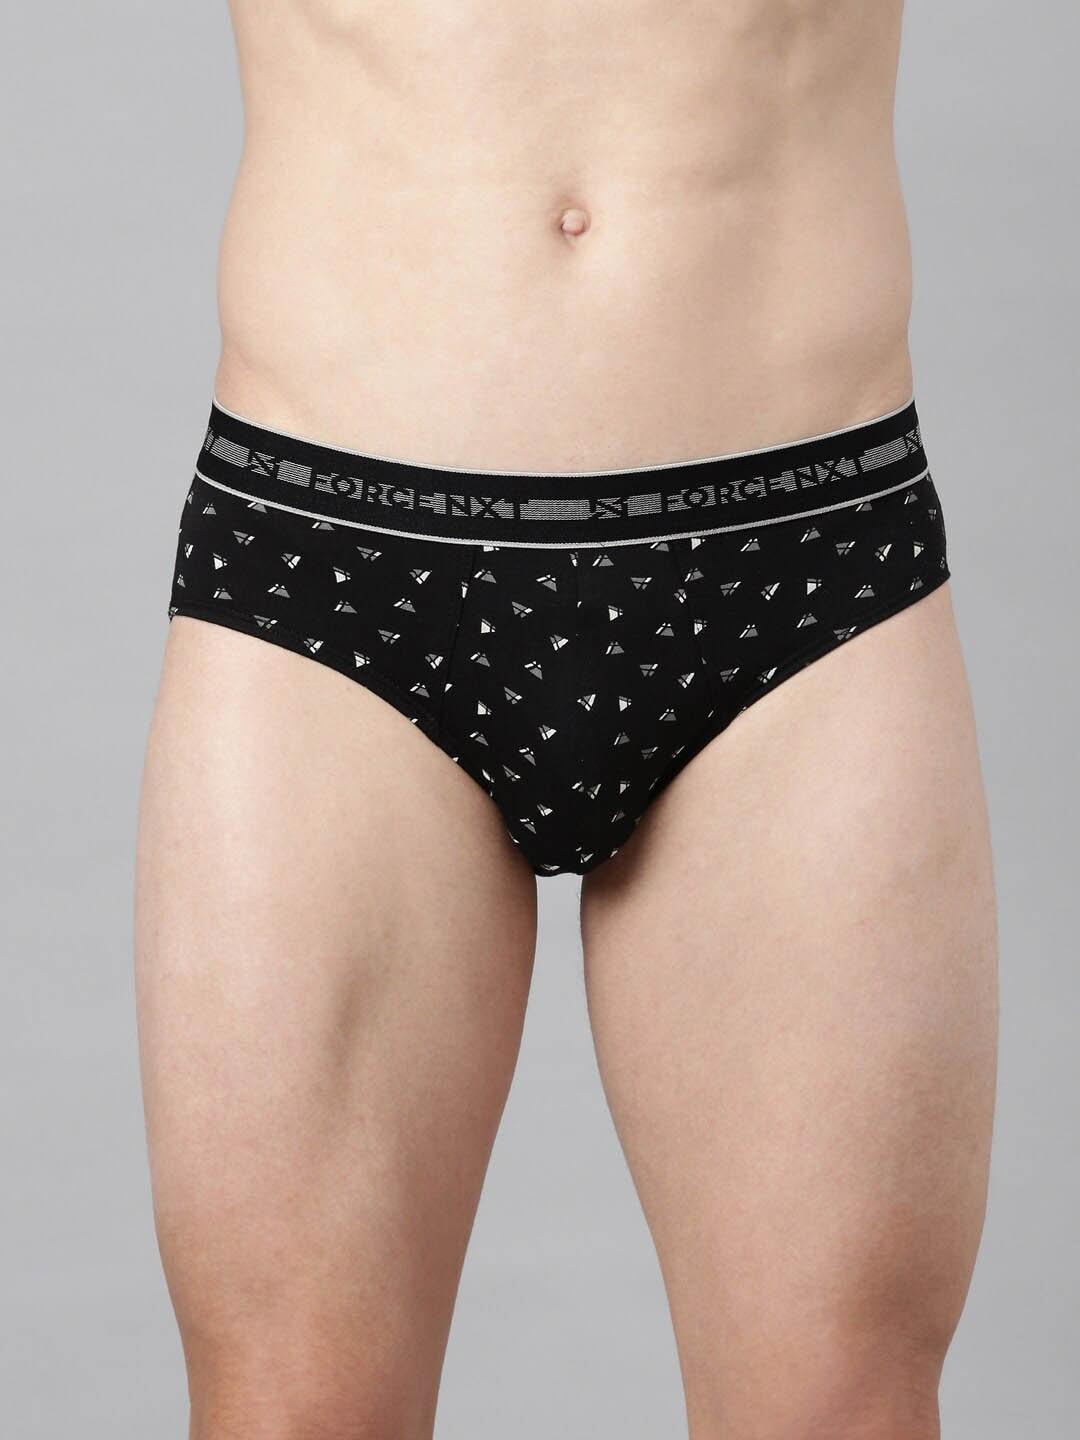 Force NXT Men Printed Super Combed Cotton Assorted Basic Briefs MNFF116